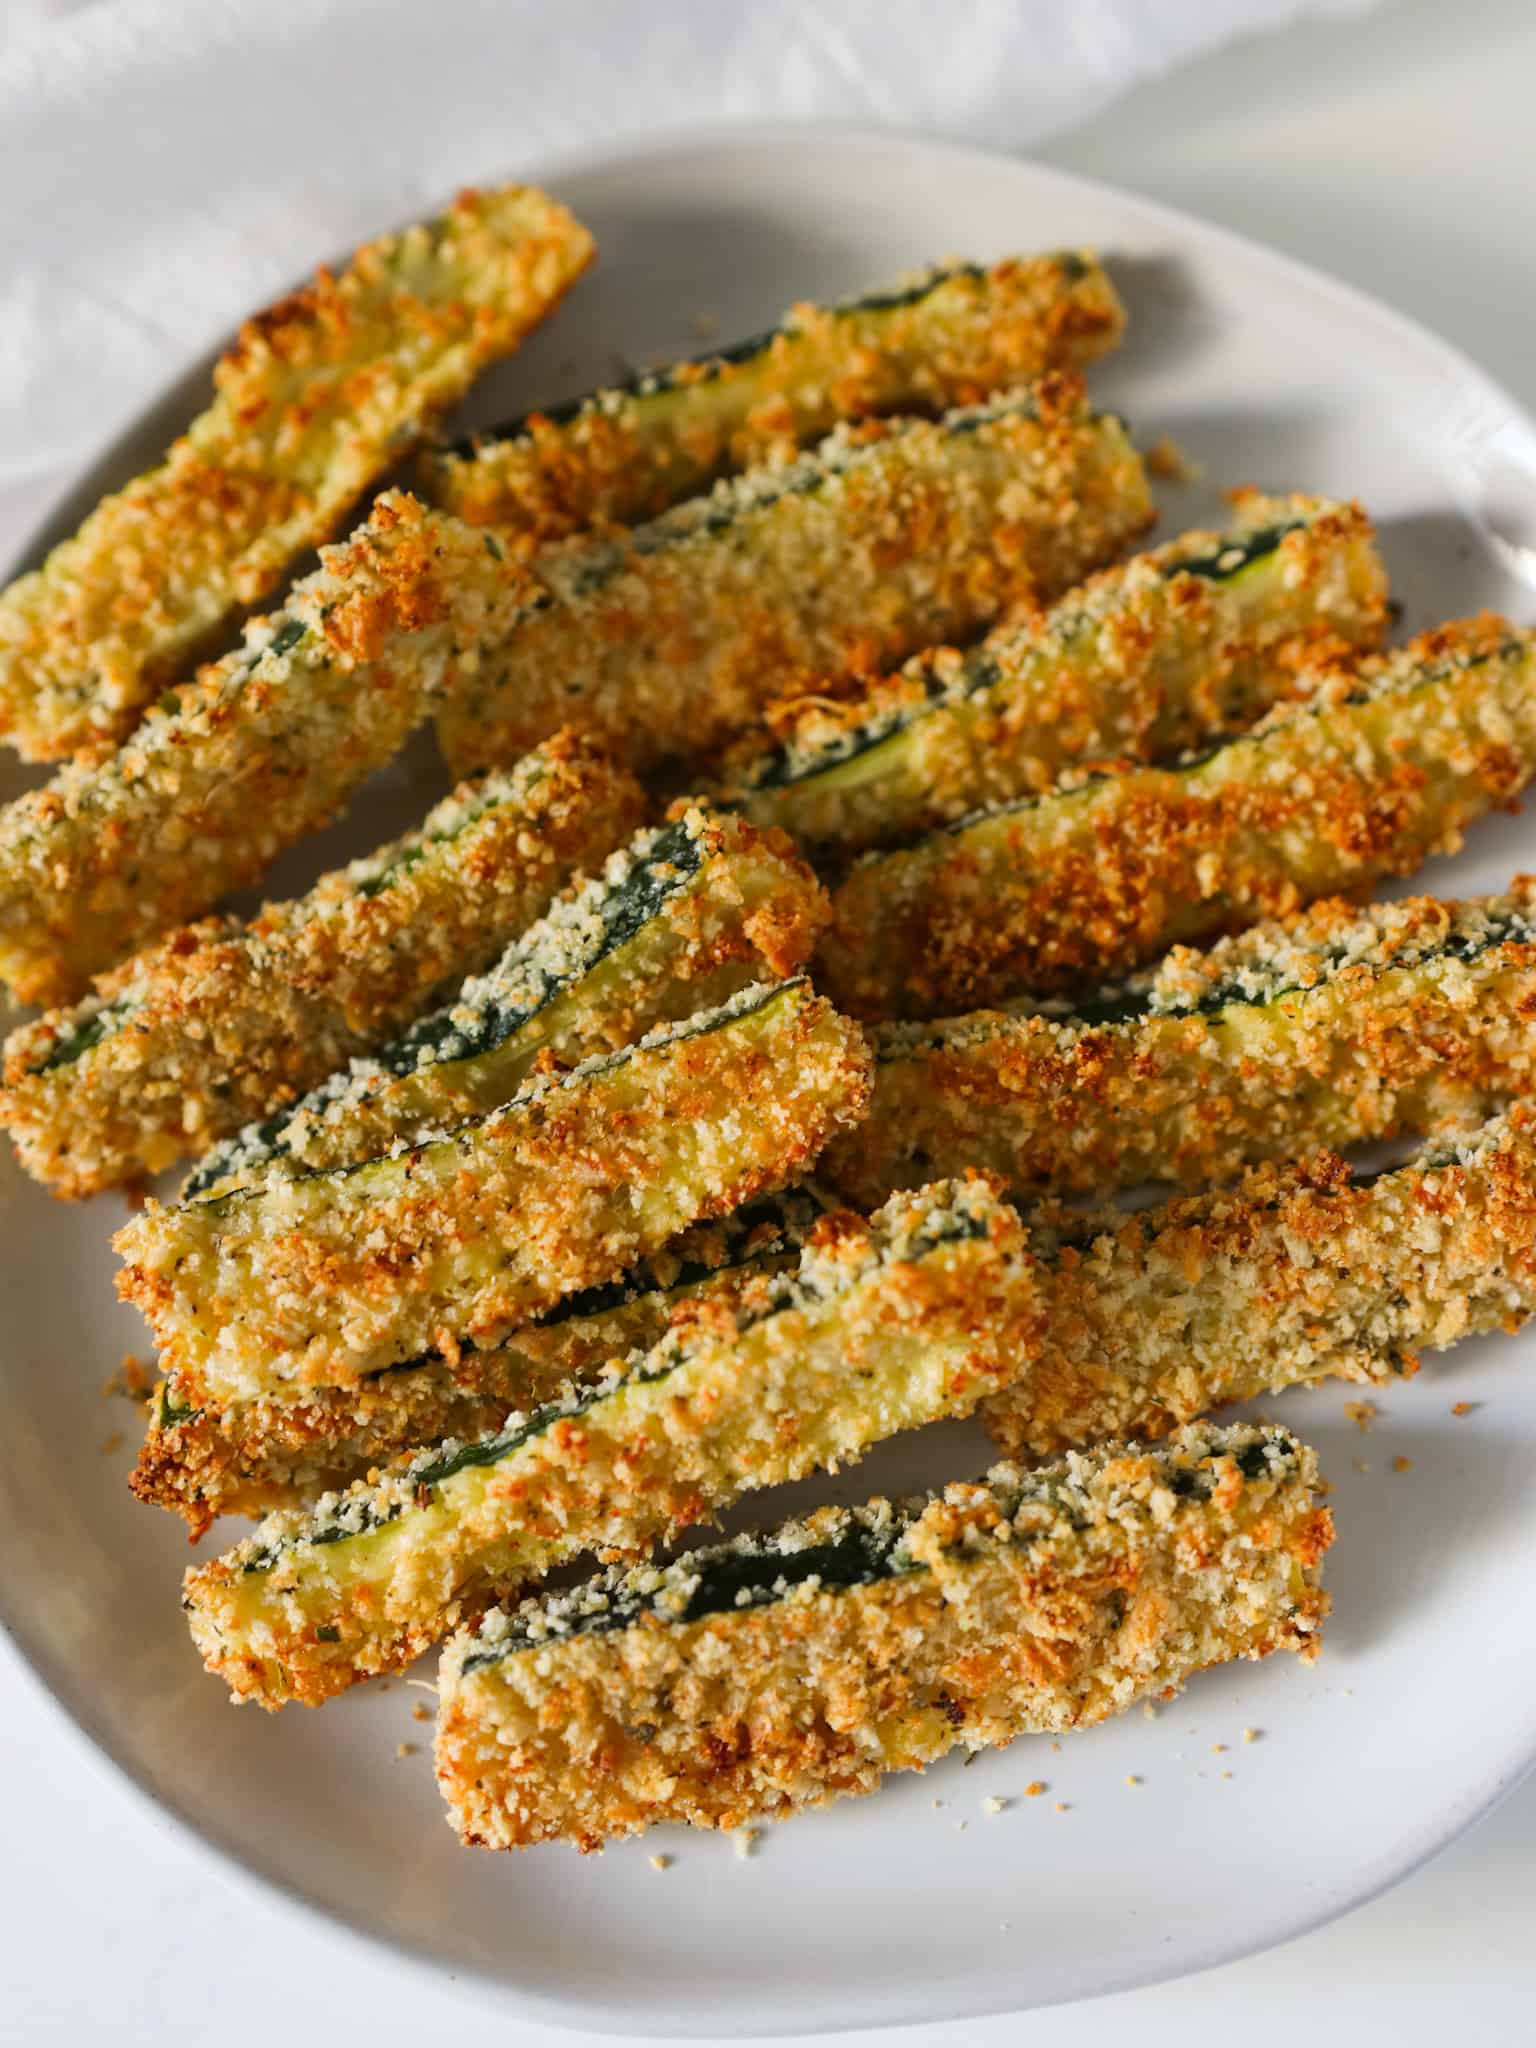 Crispy zucchini fries on a serving plate.